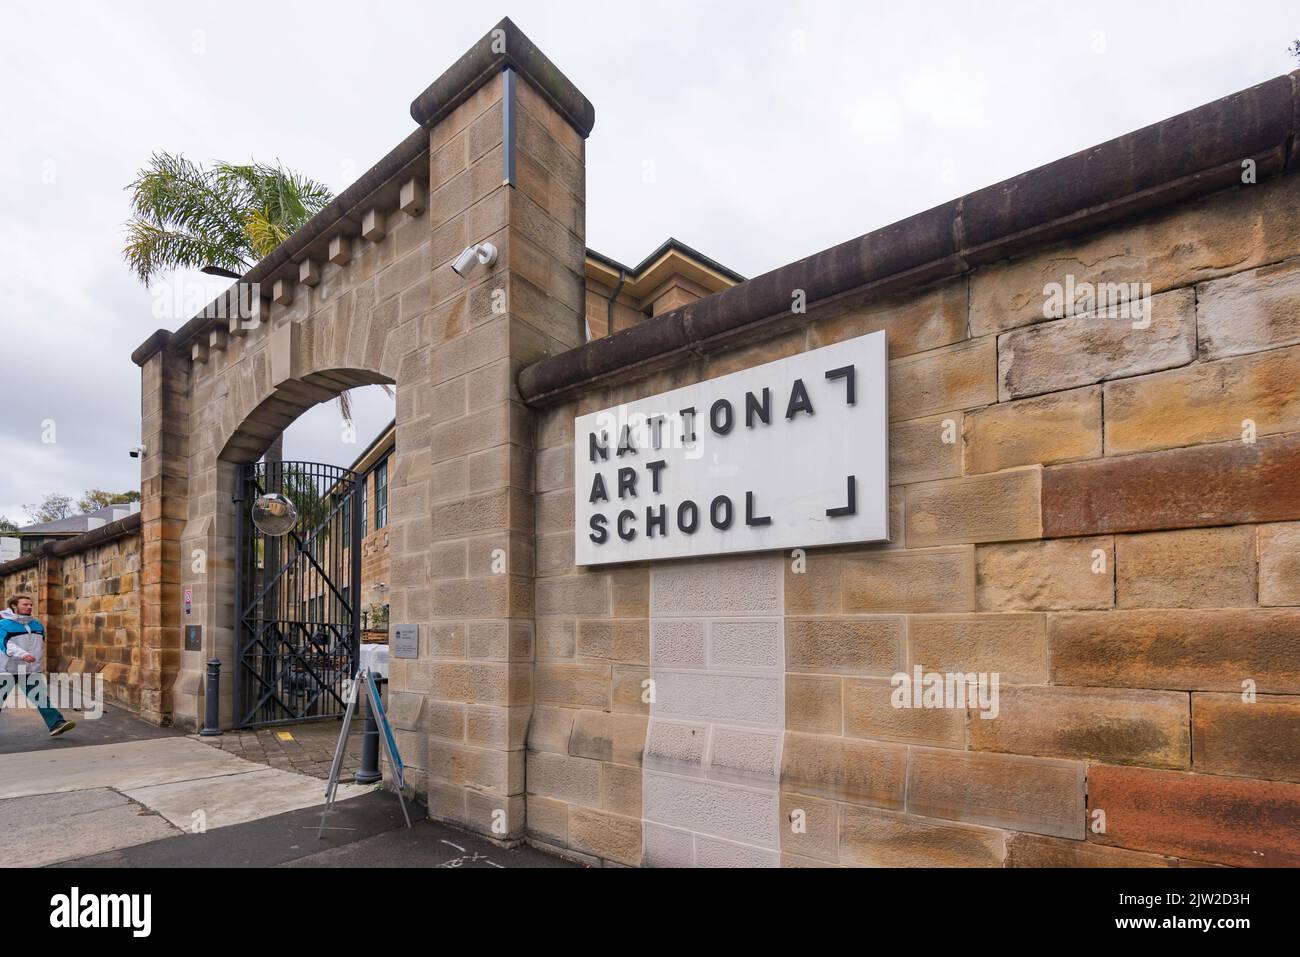 Sydney, Australia, 03 Sept 2022: Like many other tertiary institutions in New South Wales around this time of year, the National Art School. based in the historic ex Darlinghurst Gaol, held its Open Day today. The school offers undergraduate and post-graduate studies across a range of fine arts. Pictured is the Burton St entrance showing the solid sandstone, convict built walls of the original gaol. Credit: Stephen Dwyer / Alamy Live News Stock Photo